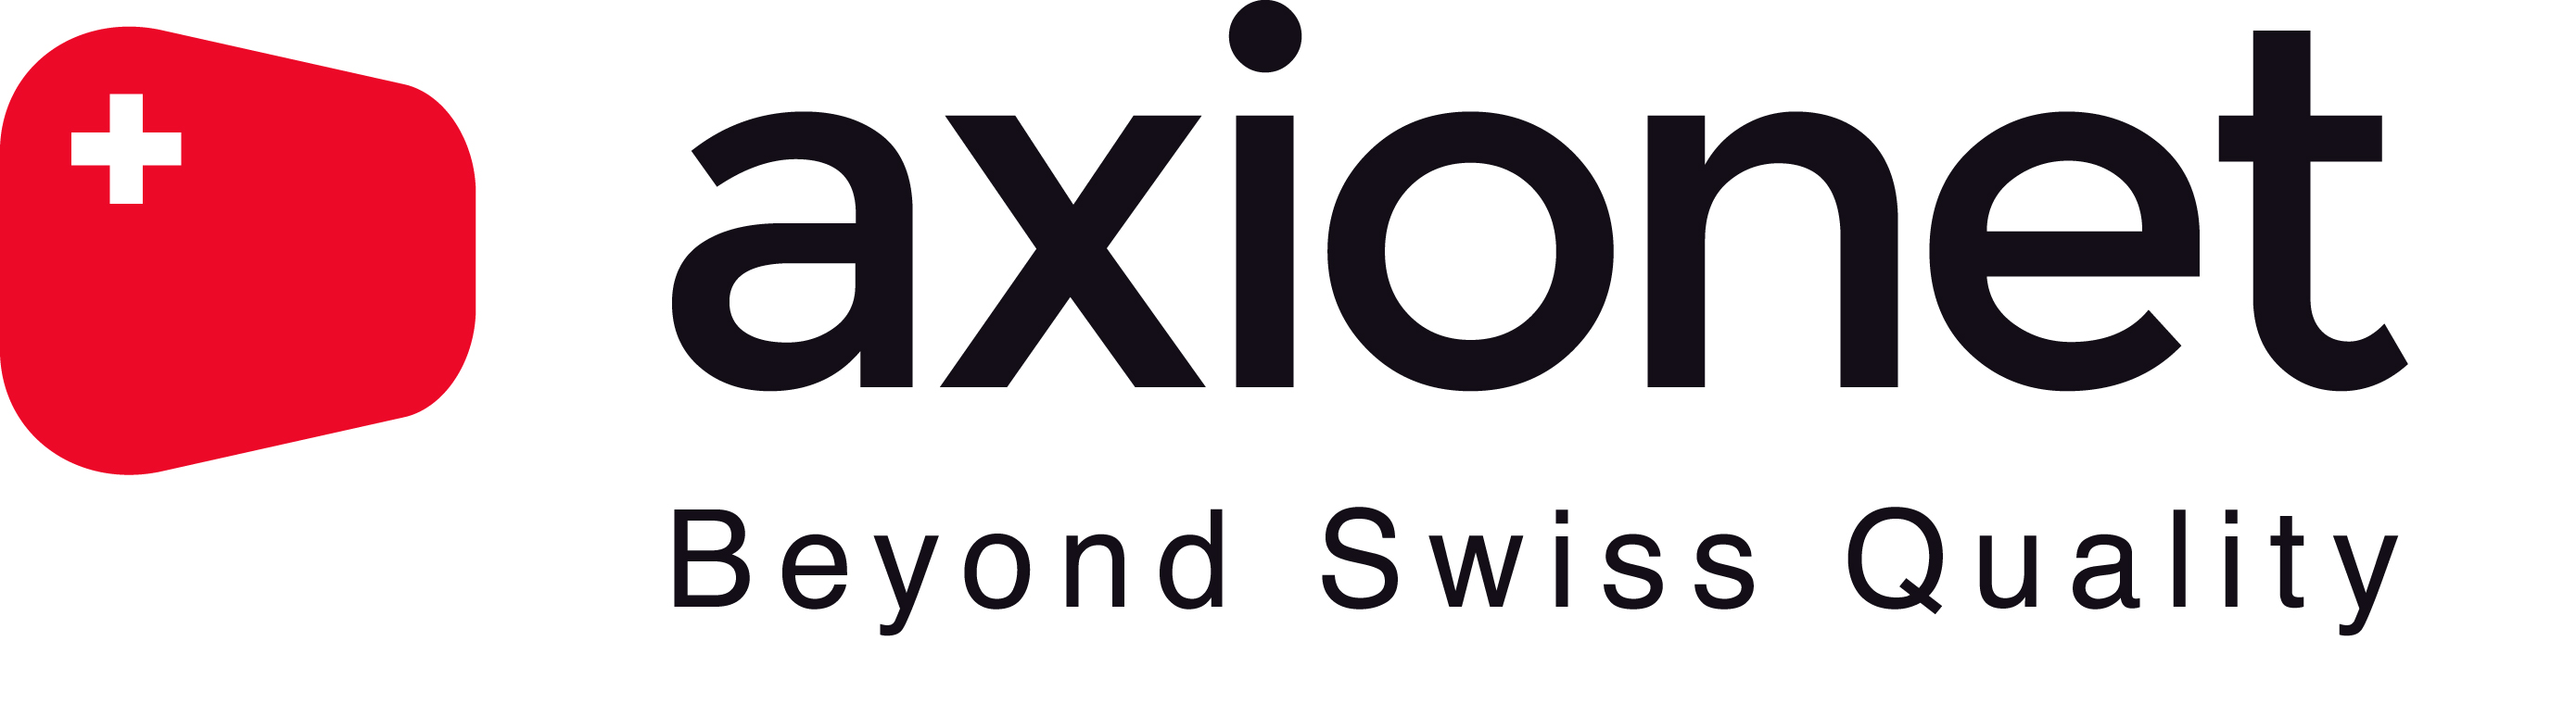 http://netcommsuisse.ch/Our-Associates/Axionet.html